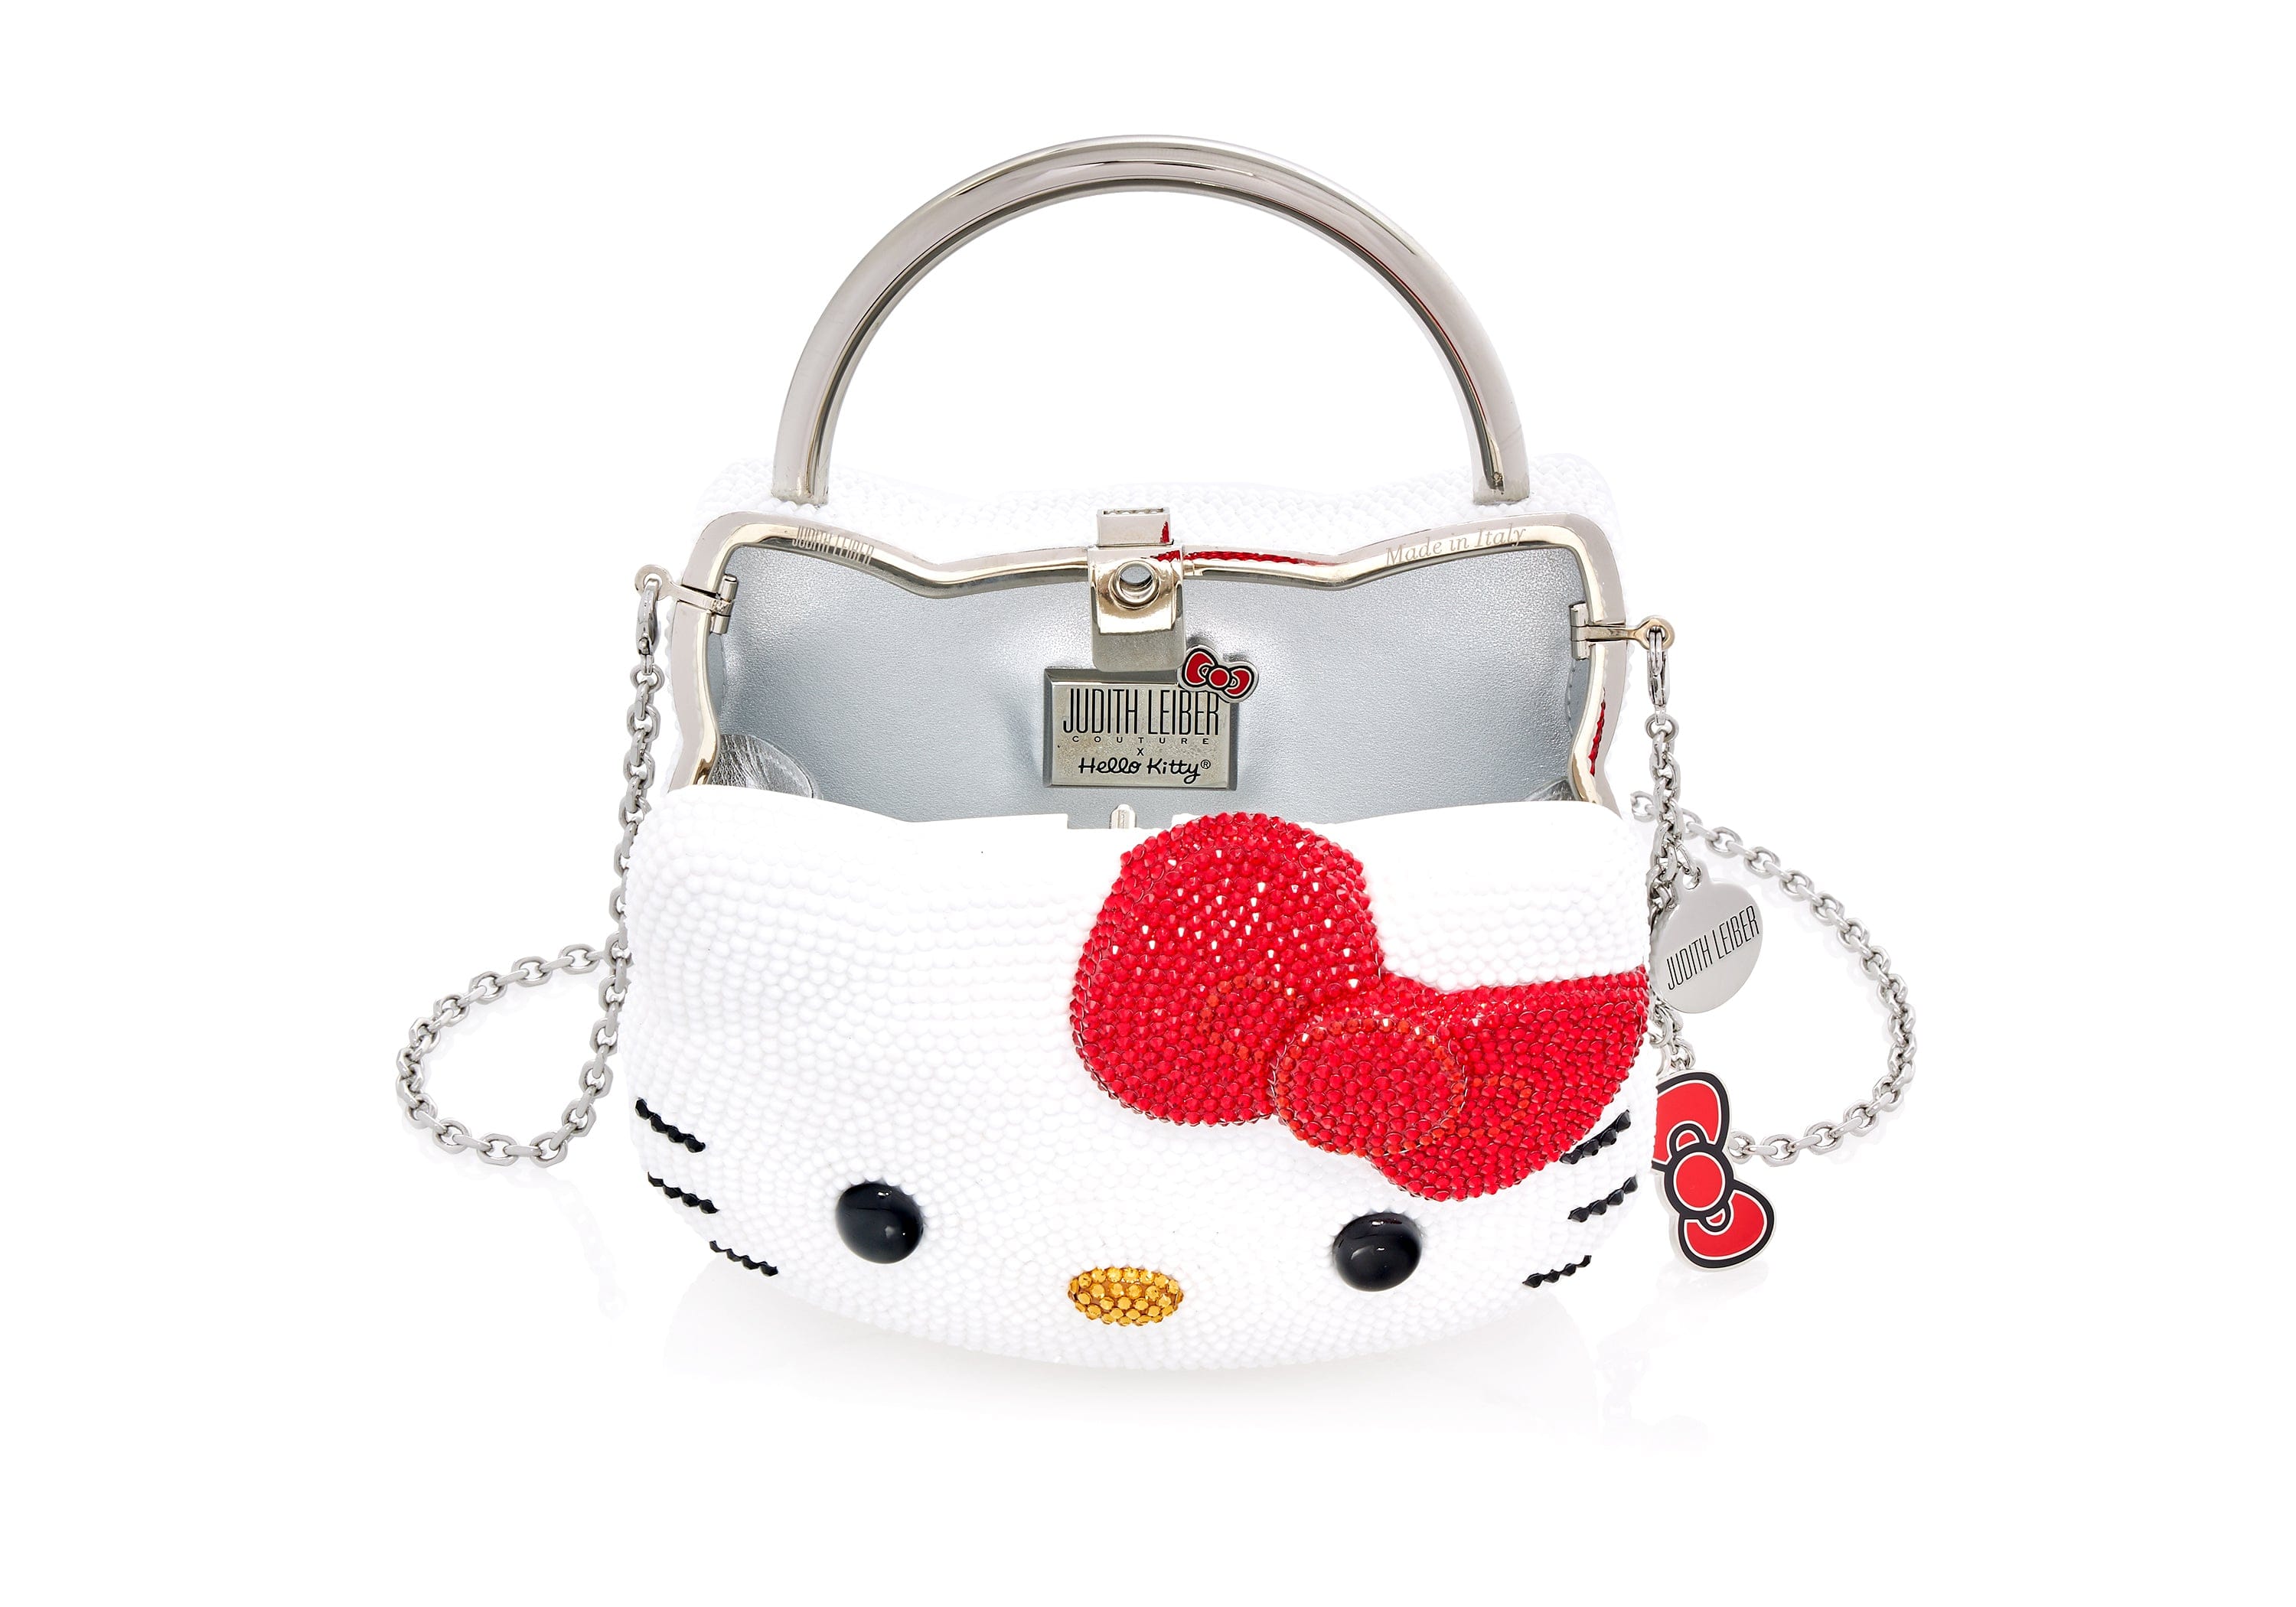 Hello Kitty with Milk Red Tote Purse - Entertainment Earth